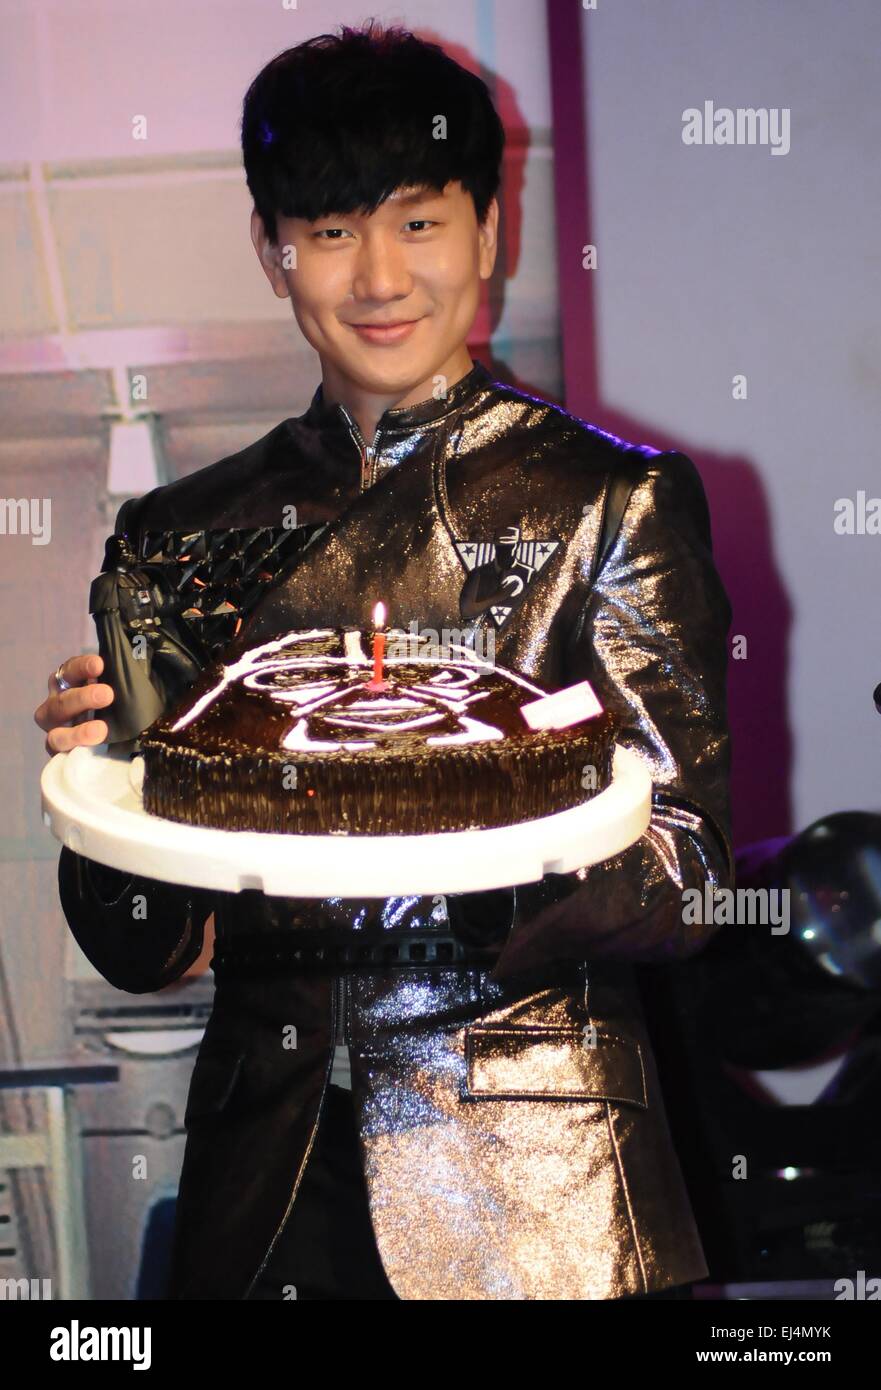 Taipei. 21st Mar, 2015. Singaporean singer JJ Lin shows his birthday cake during his birthday party in Taipei, southeast China's Taiwan, March 21, 2015. © Xinhua/Alamy Live News Stock Photo